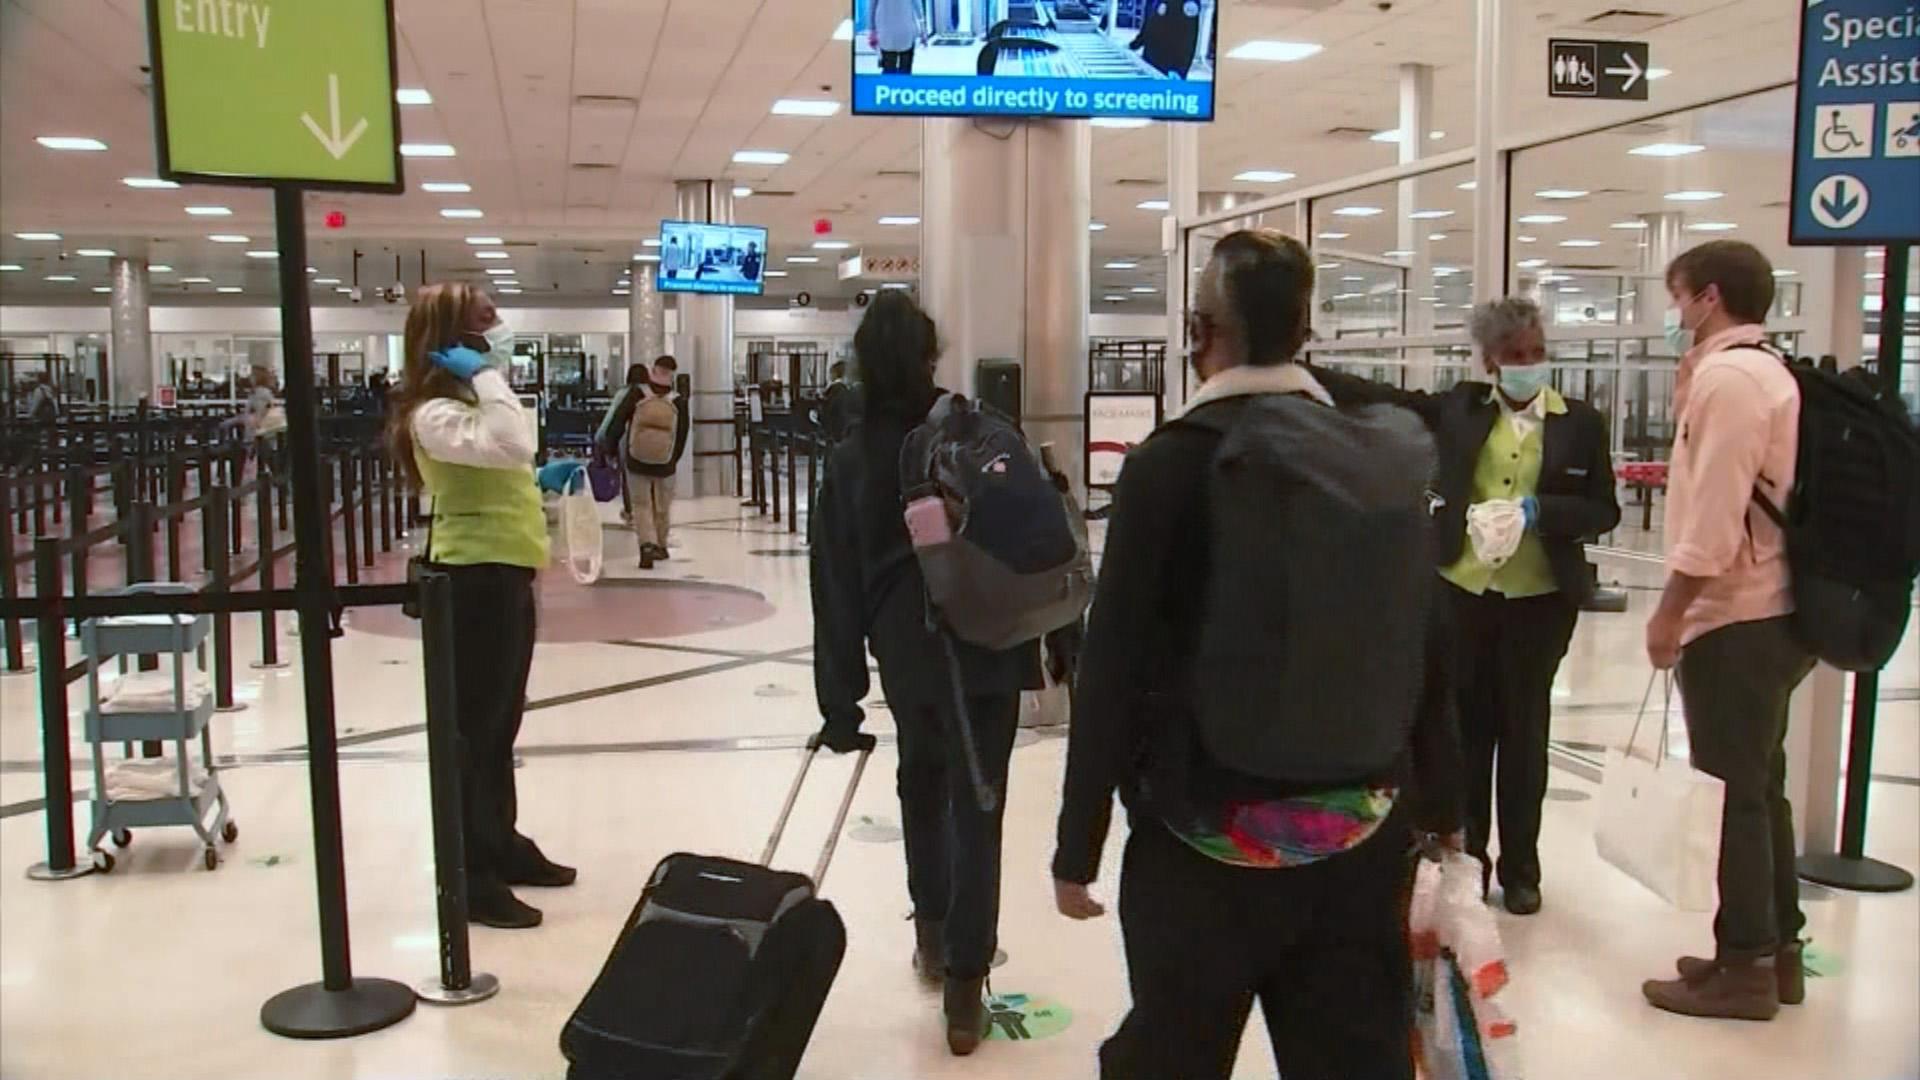 Public health officials have been urging Americans to reconsider their travel plans this holiday week amid a resurgence of COVID-19 infections. (WTTW News via CNN)